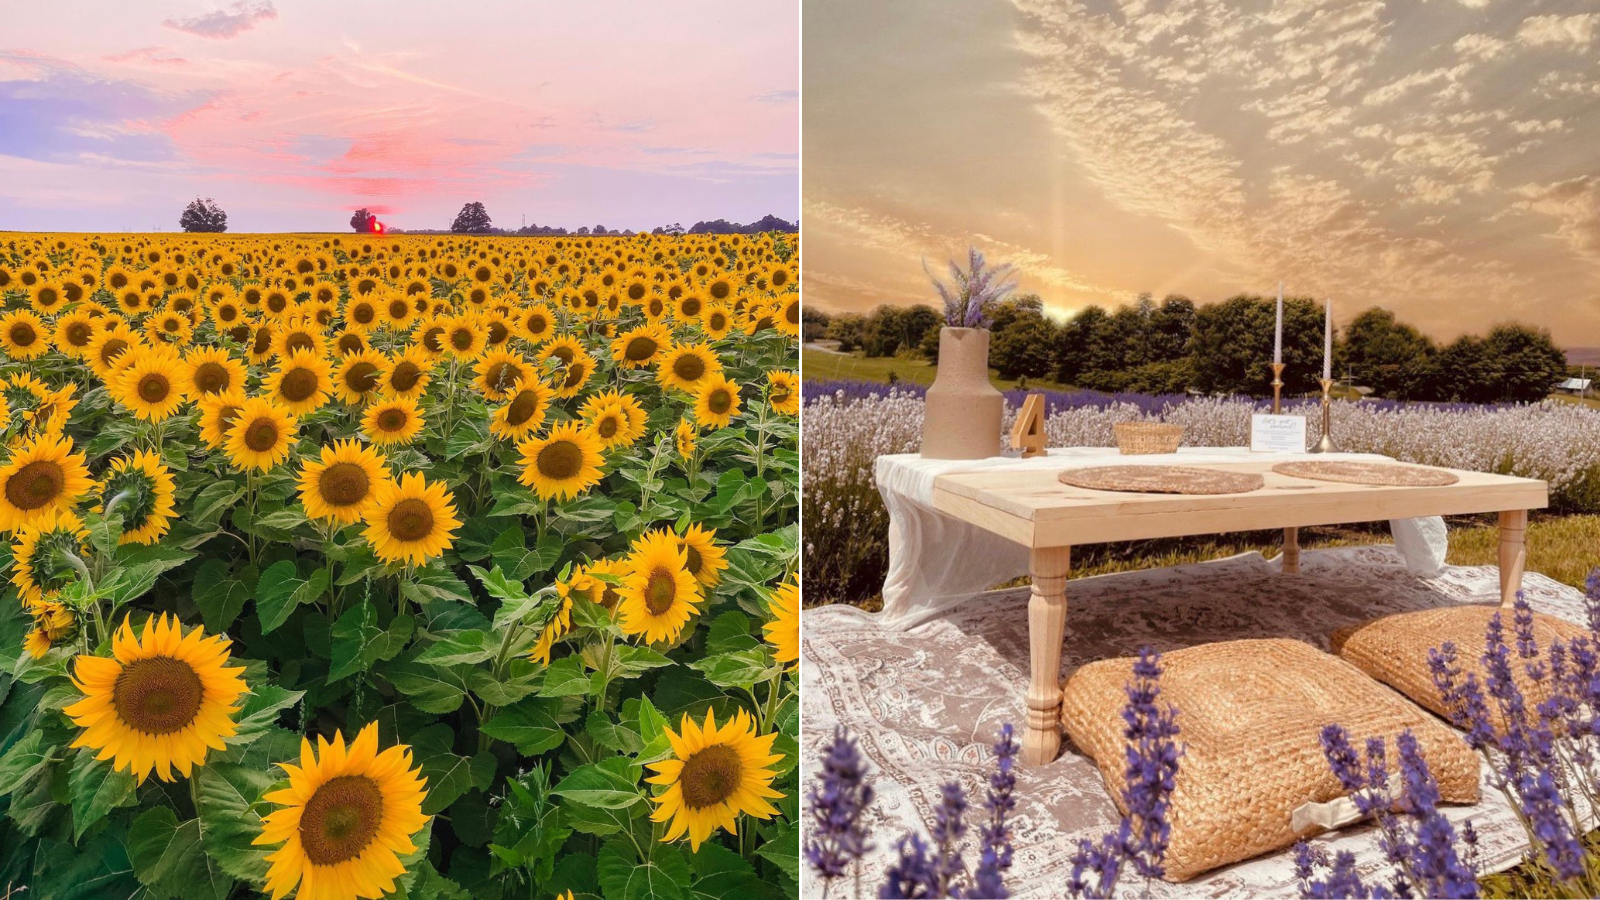 Collage photo with field of yellow sunflowers on the left and a wooden table with cushions in a lavender field on the right